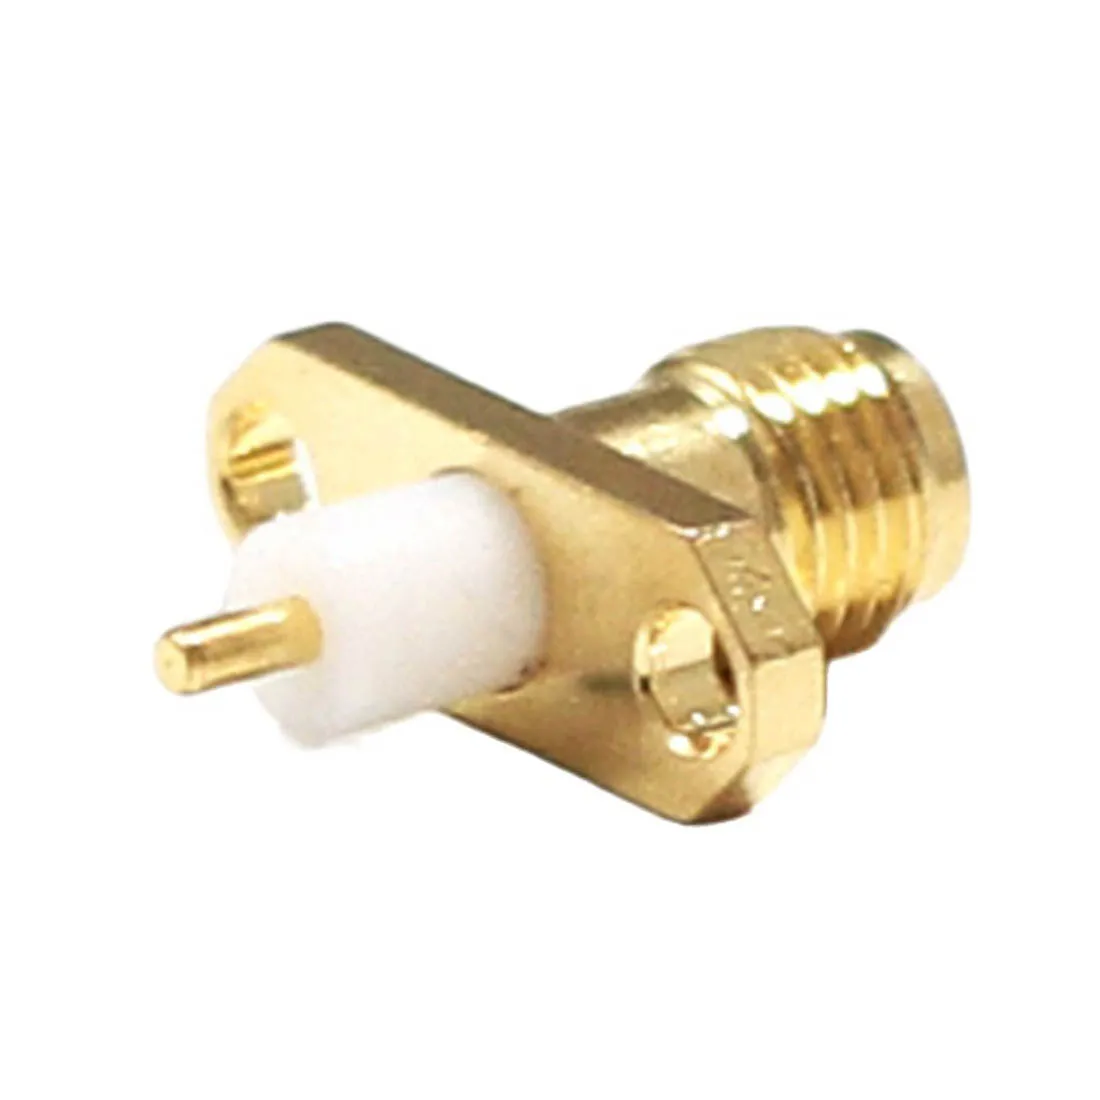 1pc NEW  SMA Female Jack RF Coax Modem Convertor Connector Panel Mount Solder Post Straight Insulator Long 4mm Goldplated waterproof industrial panel mount dustproof cover female usb socket jack data adapter type c usb3 0 connector 24v 2a